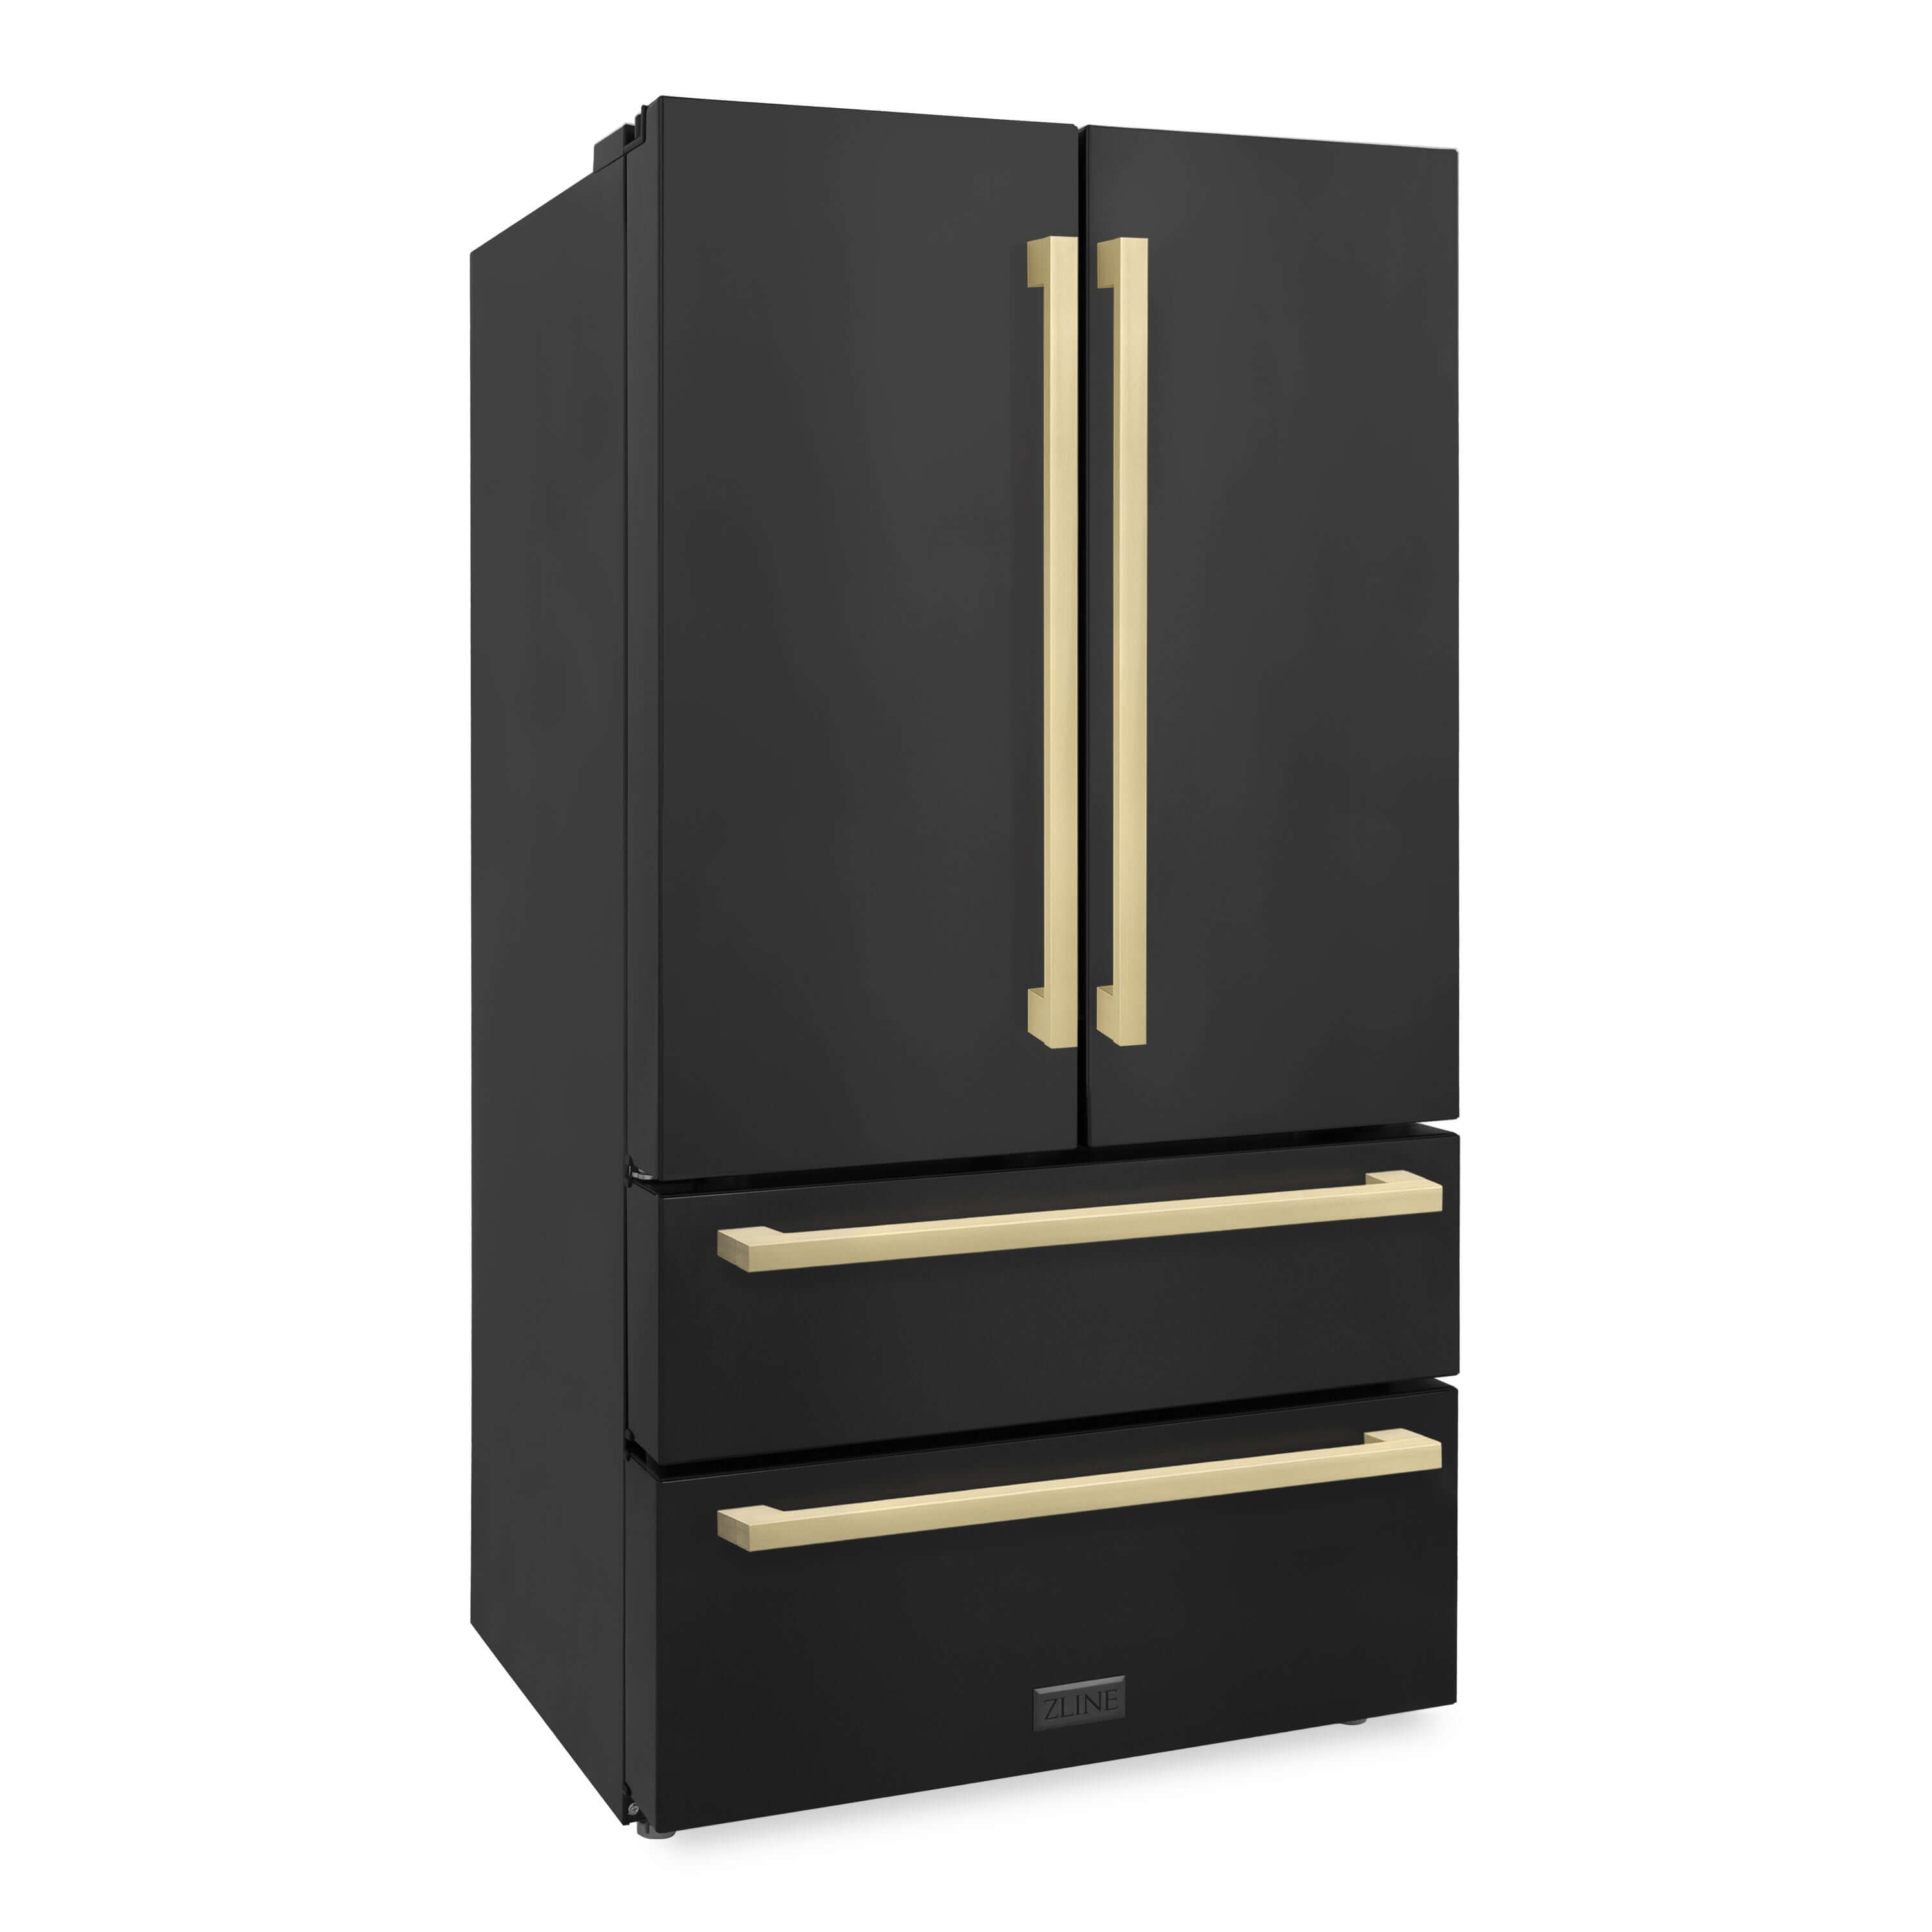 ZLINE Autograph Edition 36 in. 22.5 cu. ft 4-Door French Door Refrigerator with Ice Maker in Black Stainless Steel with Champagne Bronze Square Handles (RFMZ-36-BS-FCB) side, closed.